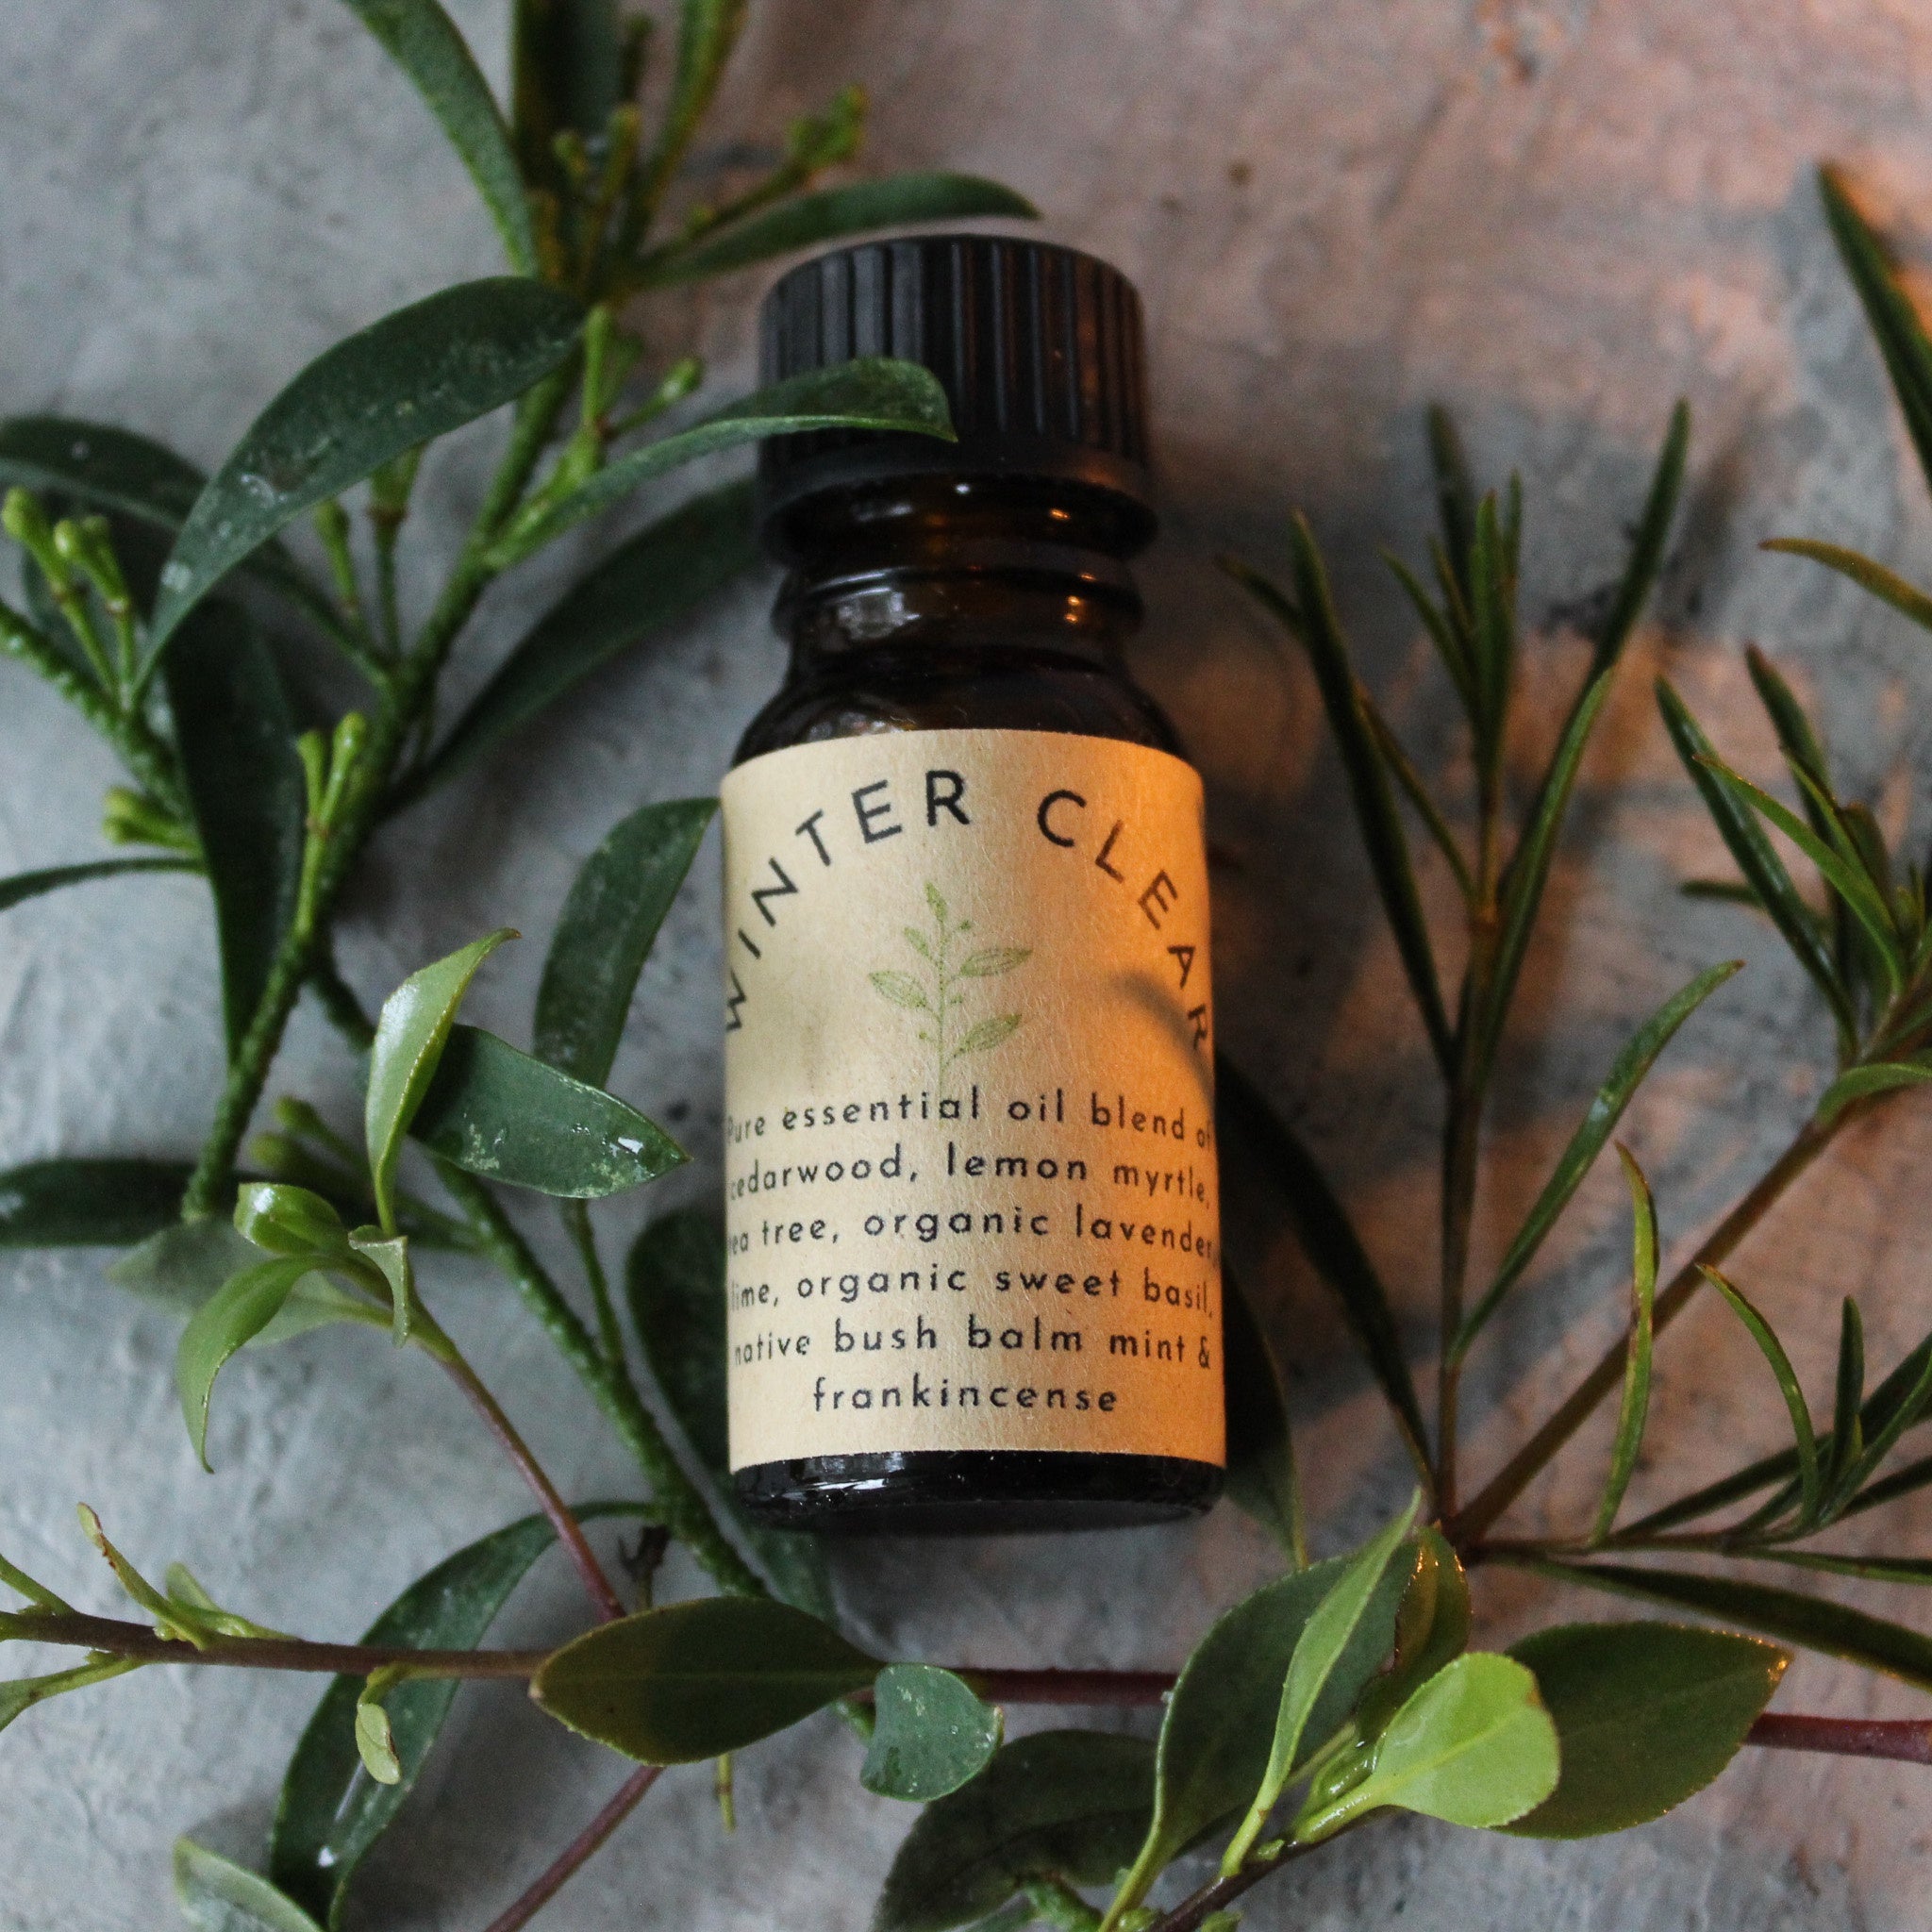 Winter Clear Essential Oil Blend - Tribe Castlemaine